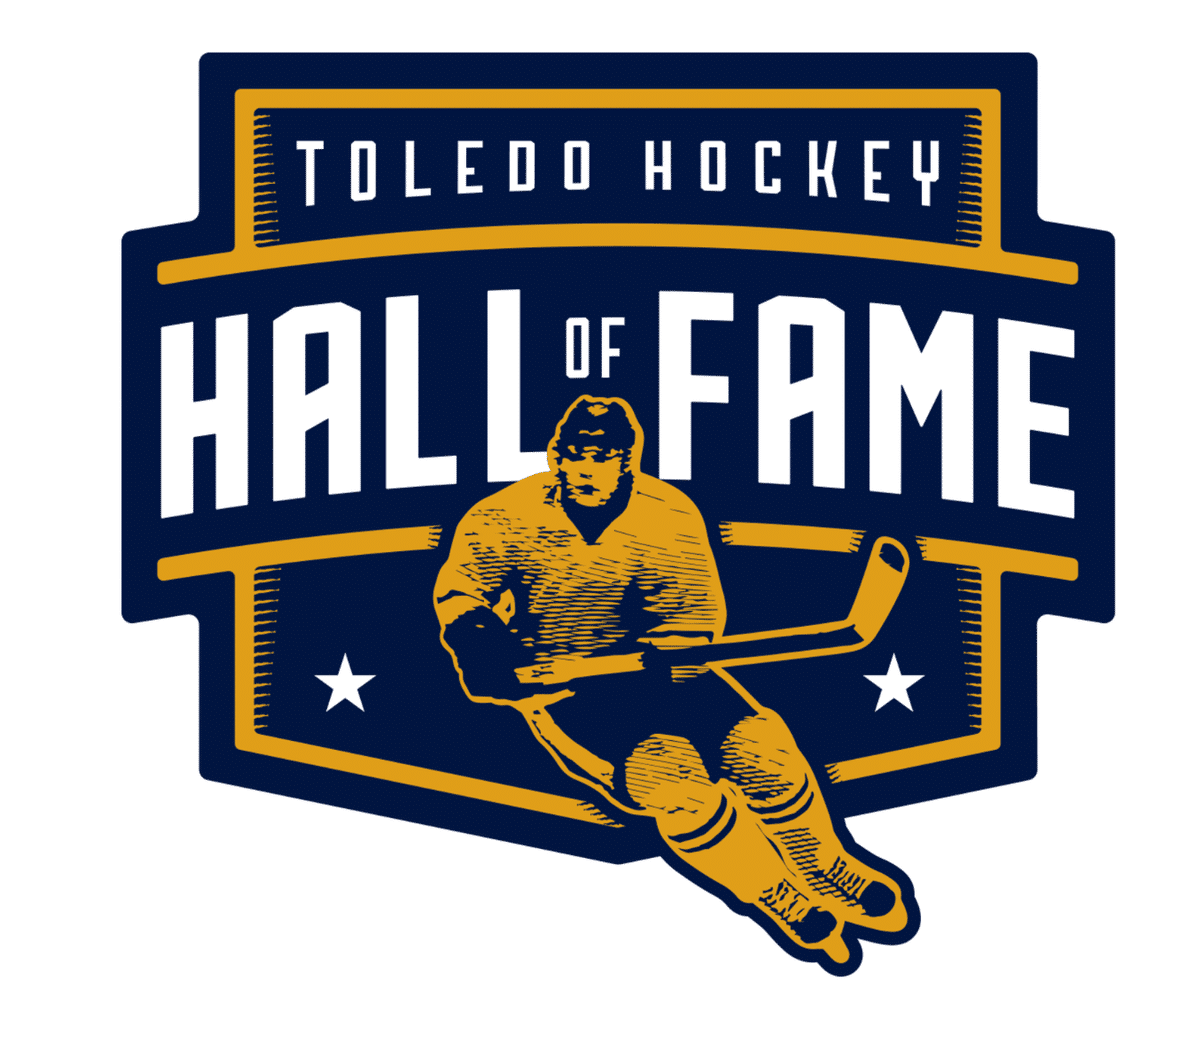 toledo-hockey-hall-of-fame-64cef0500a592.png